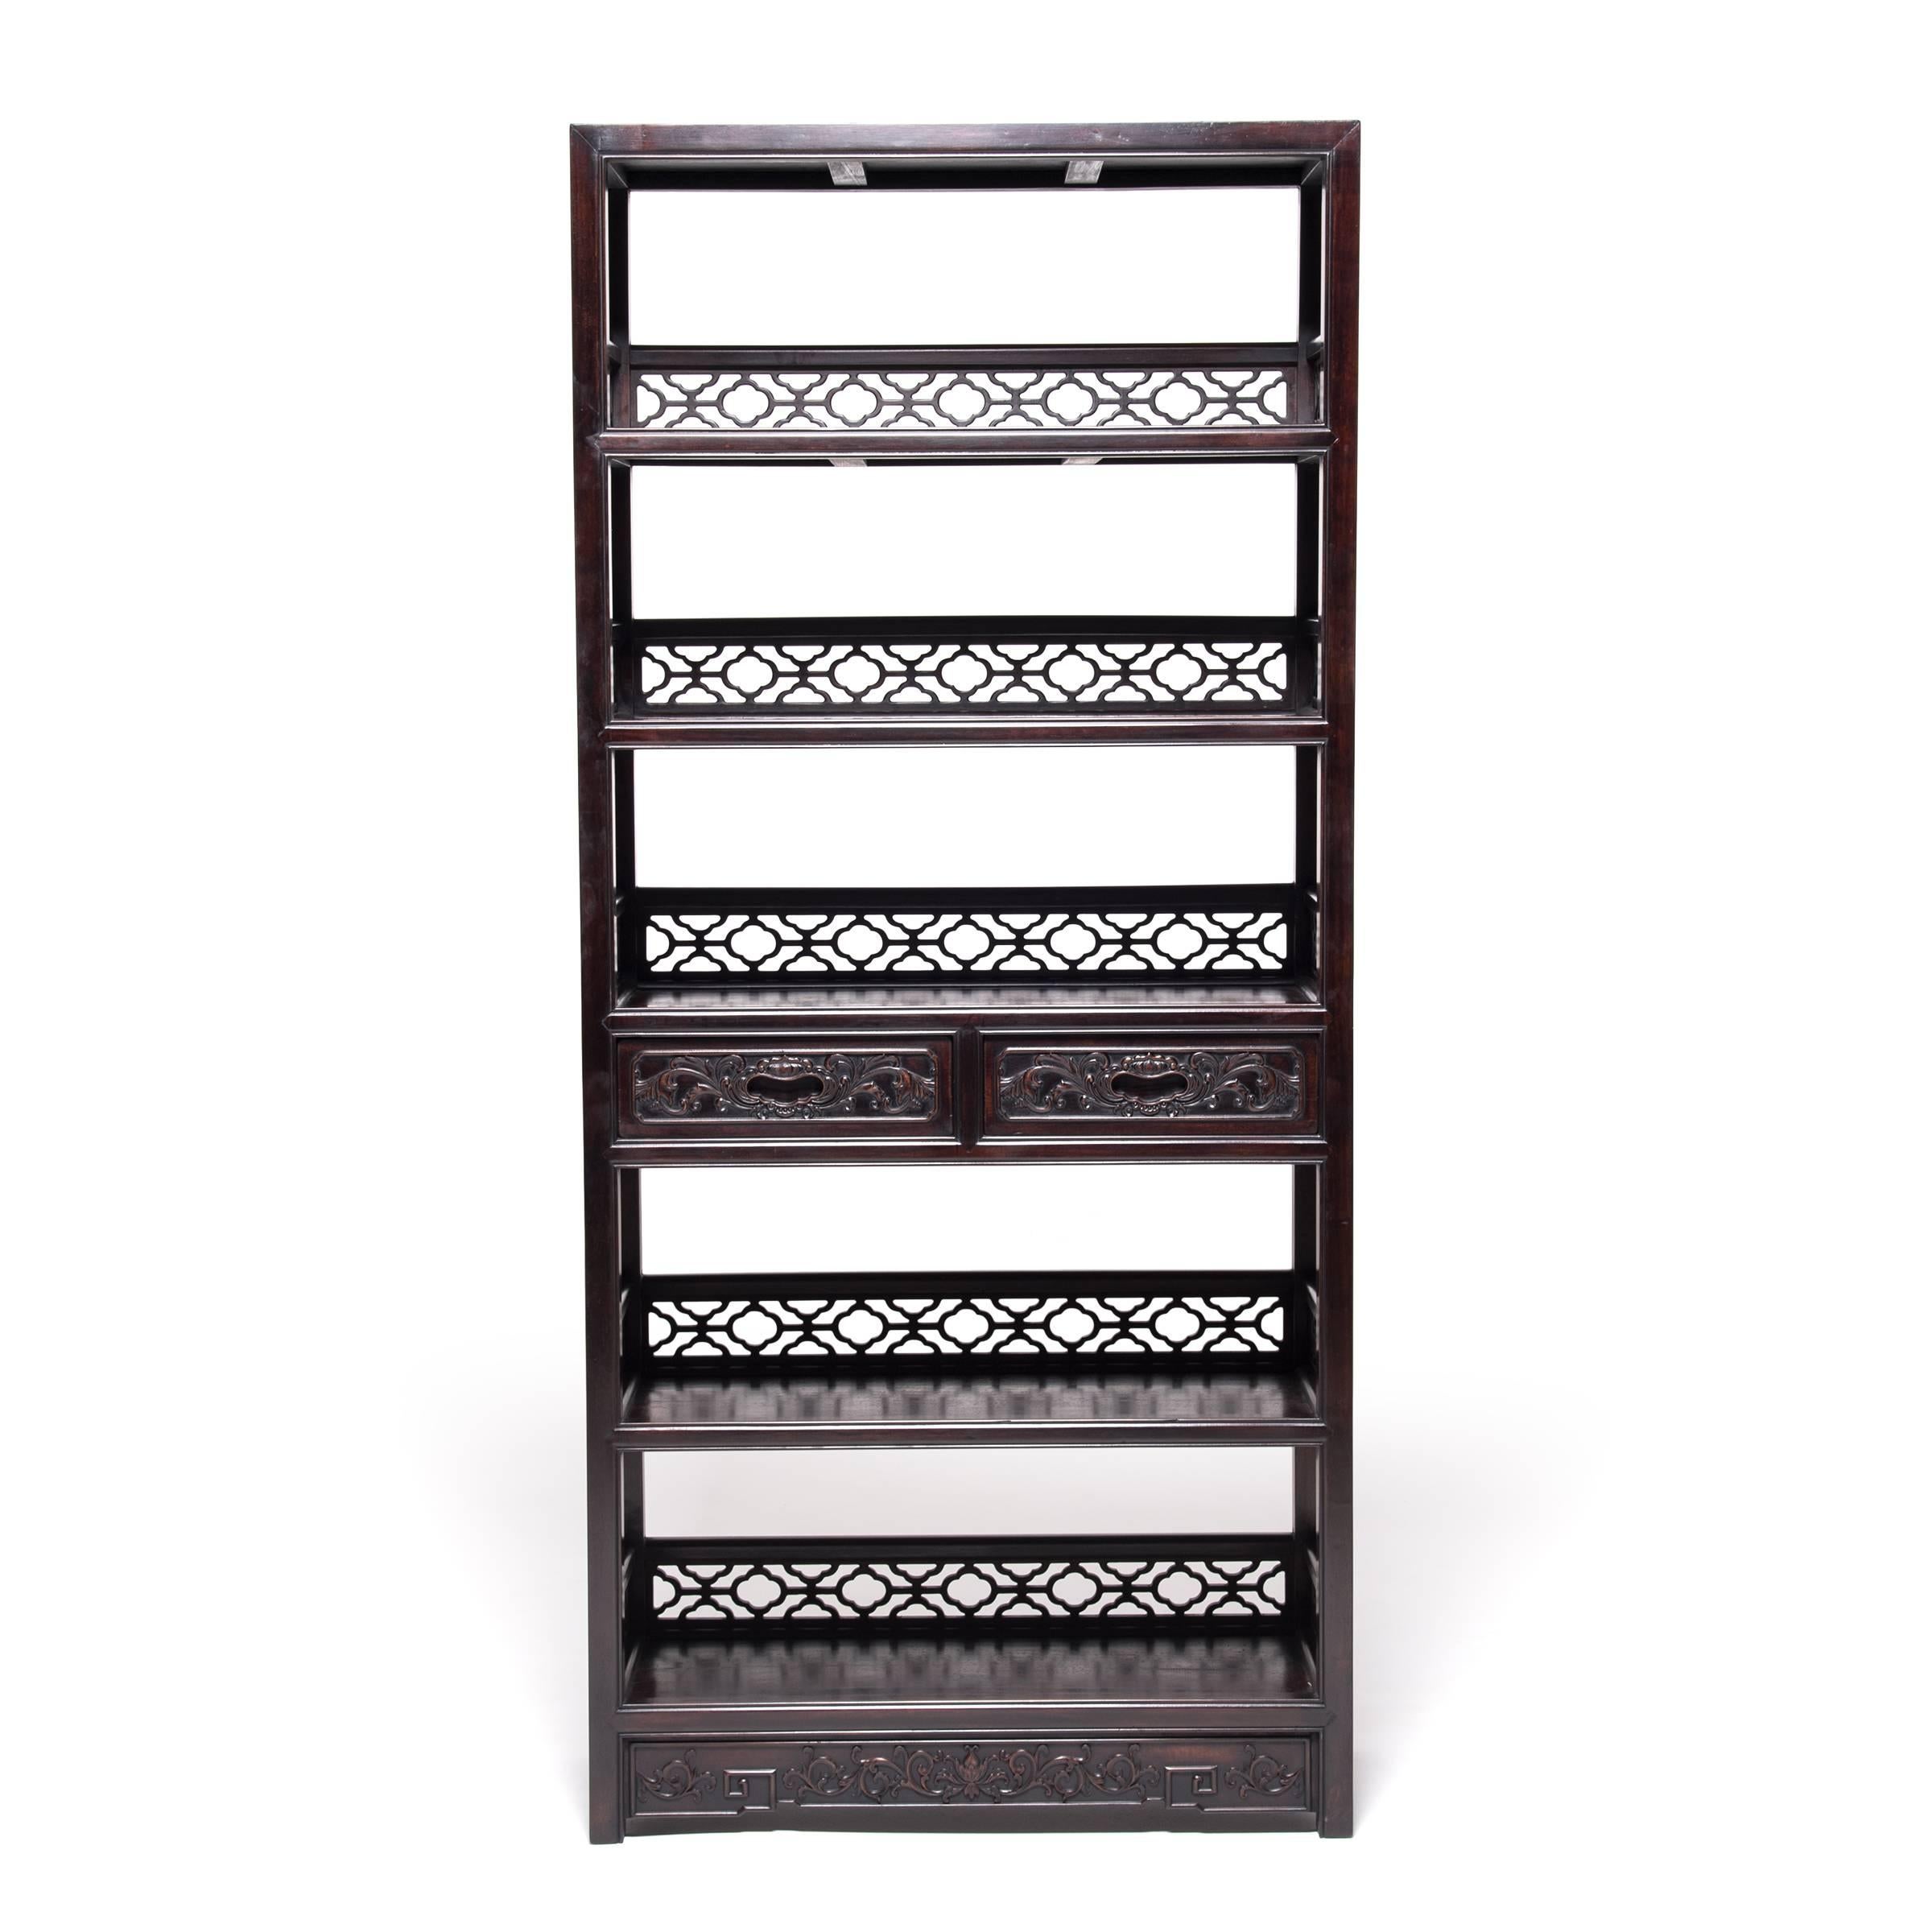 Collecting was a popular pastime for well-to-do Ming and Qing dynasty gentleman, and shelves like these would have been ideal places to display jades, curios, collectibles, and important texts. Each shelf is backed with lattice, brilliantly joined